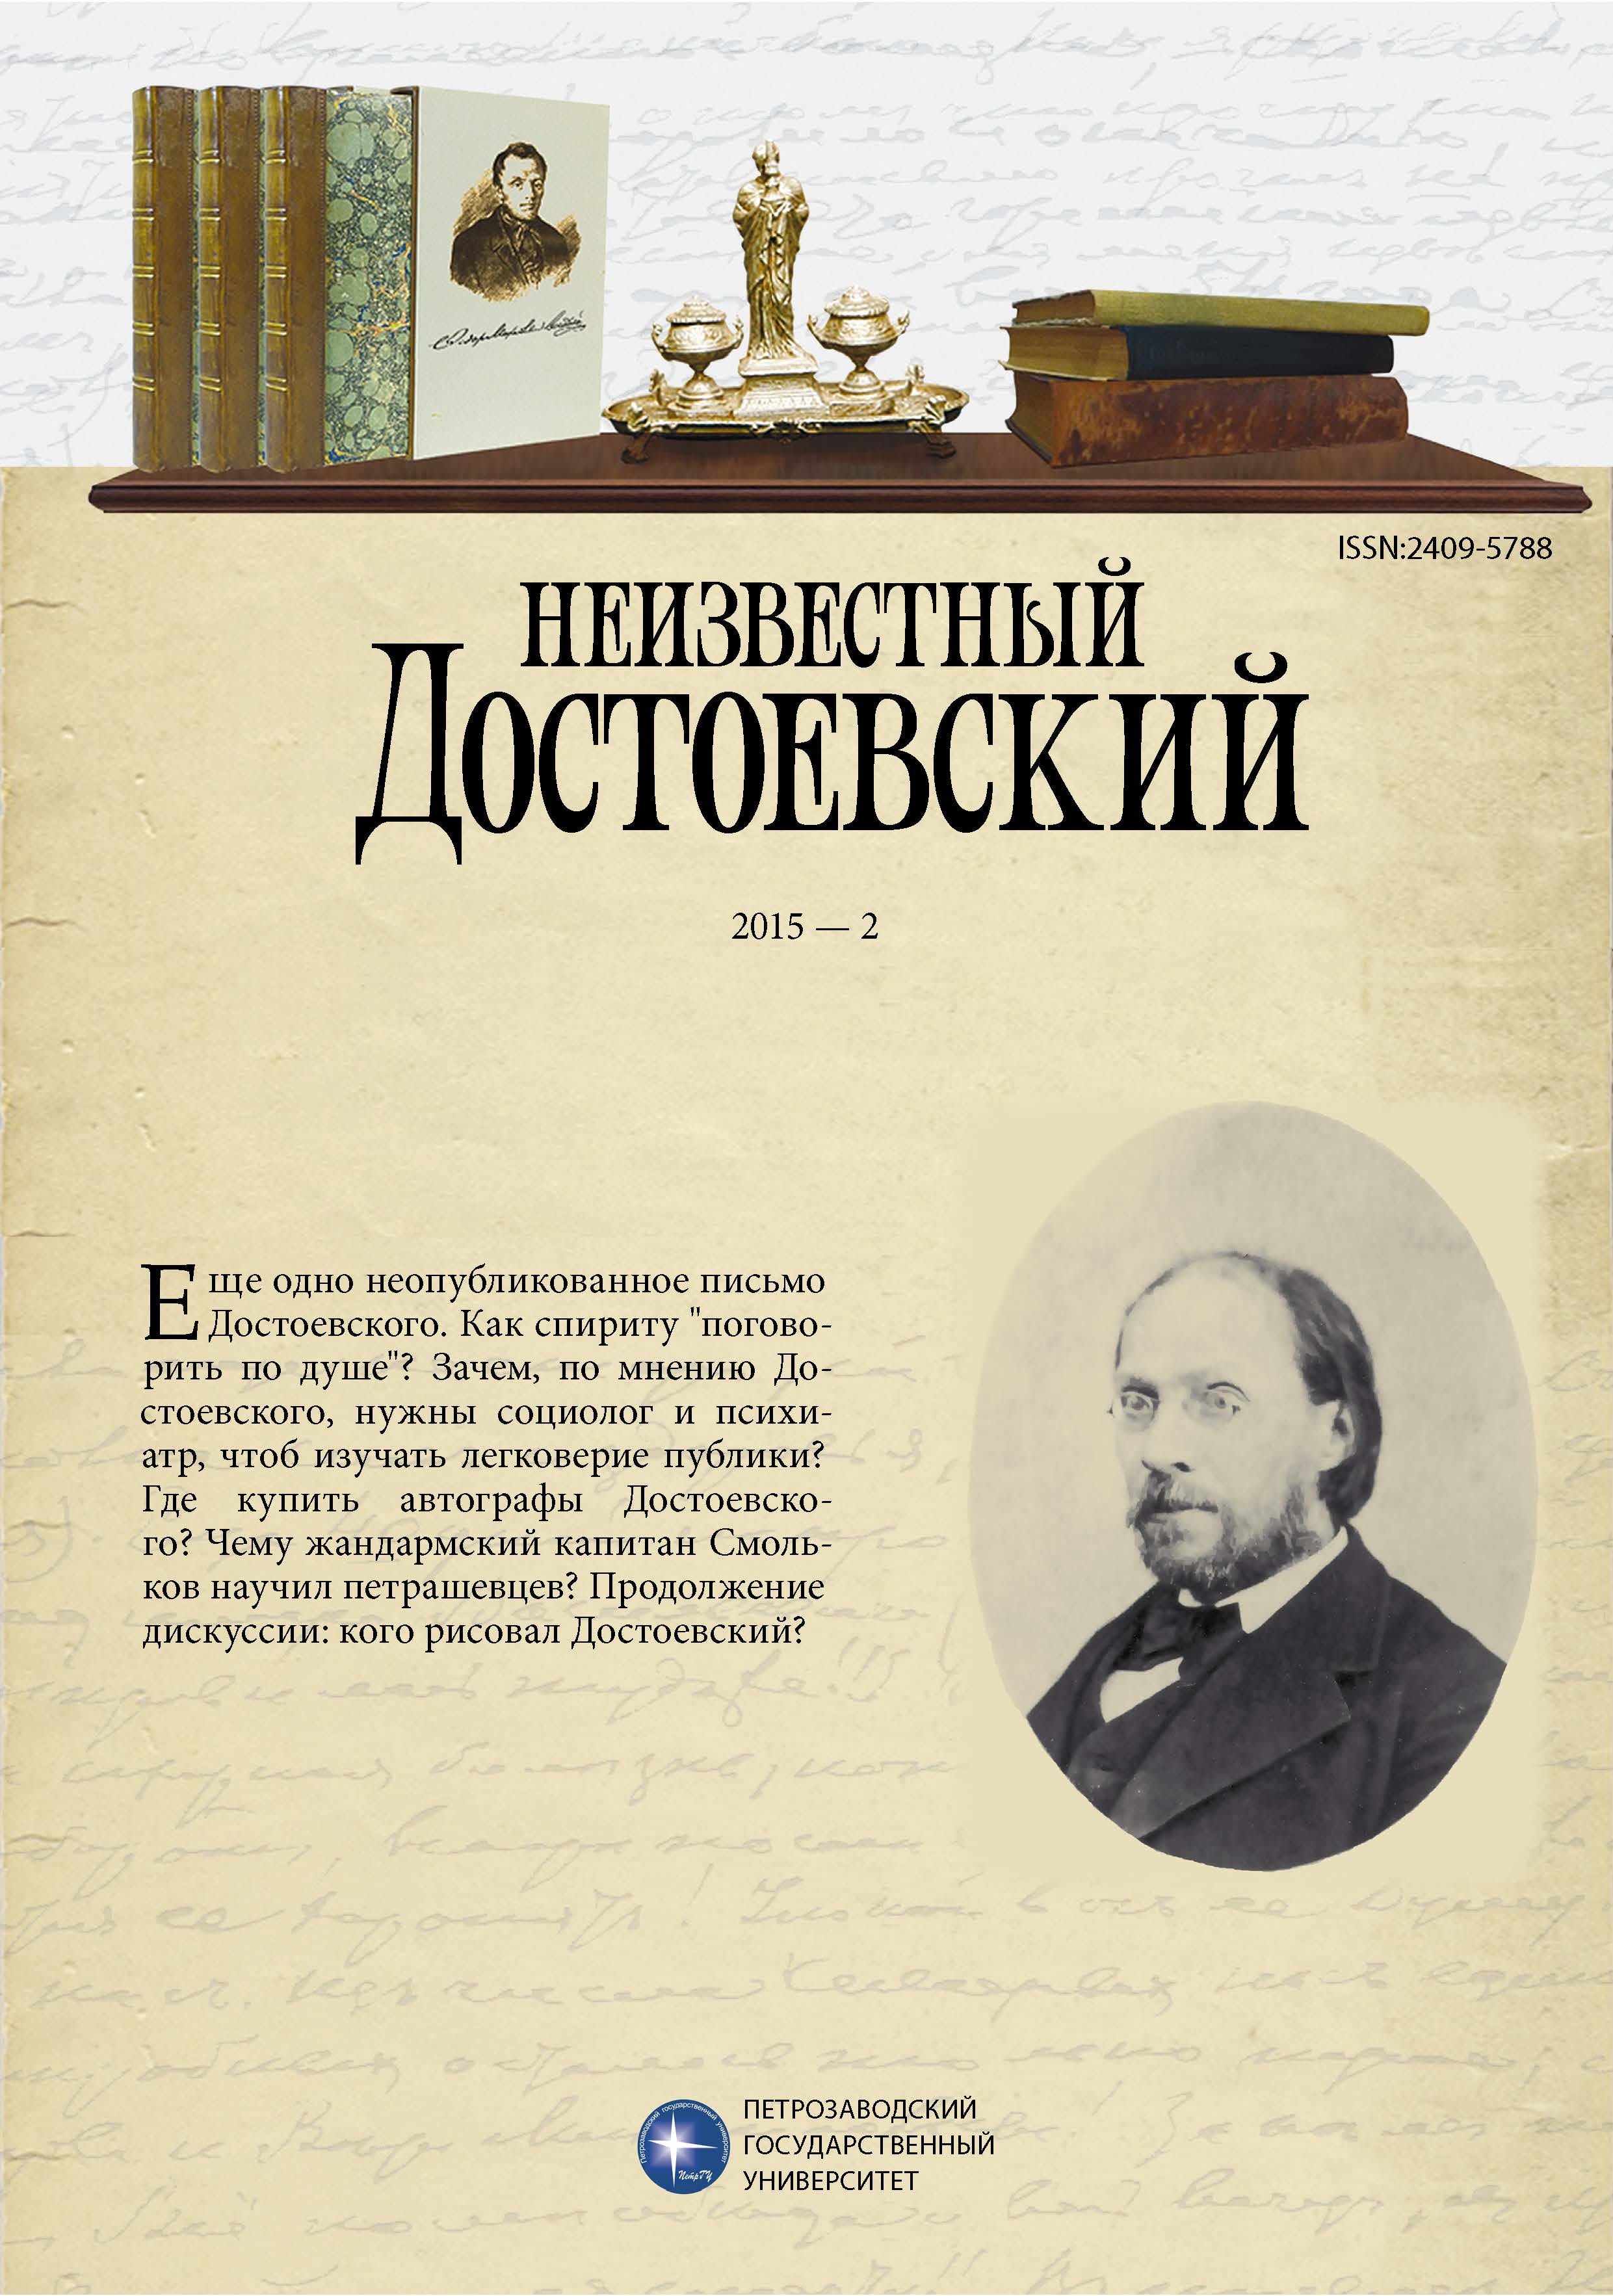 About Attribution of Portrait Drawings of Dostoevsky Cover Image